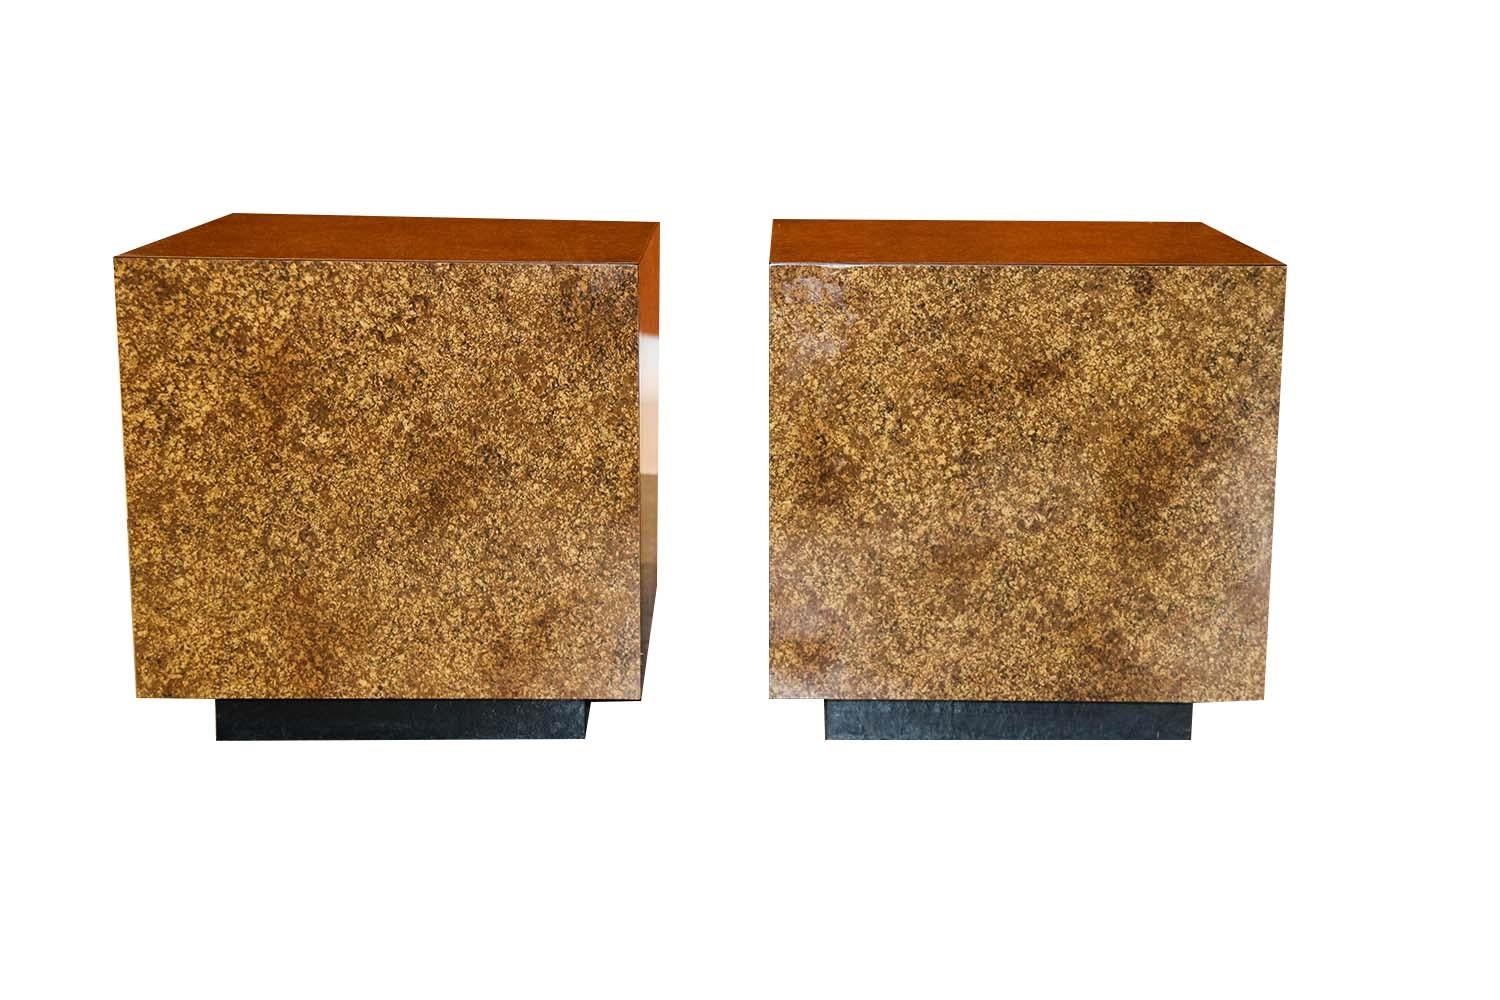 A beautiful pair of Modernist, faux tortoiseshell cube side tables, in the style of Milo Baughman. Features faux tortoiseshell oil drip finish, stylish striking design on all sides showcasing the faux tortoiseshell painted finish, each rest on an